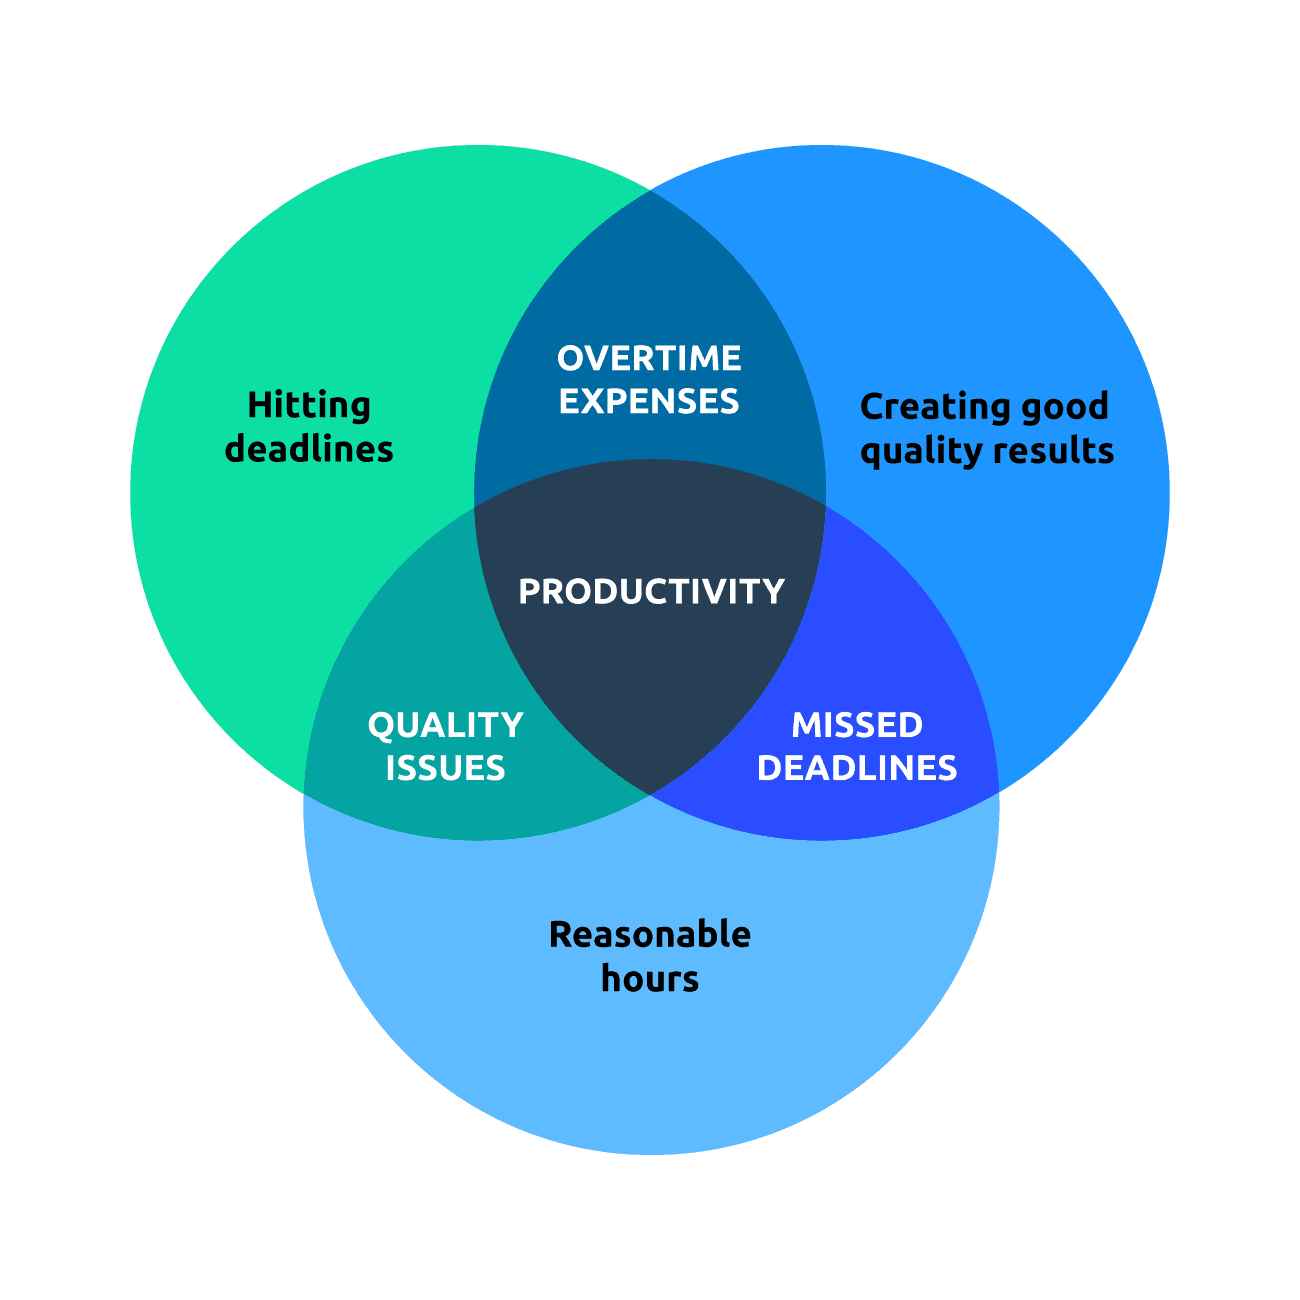 The importance of productivity